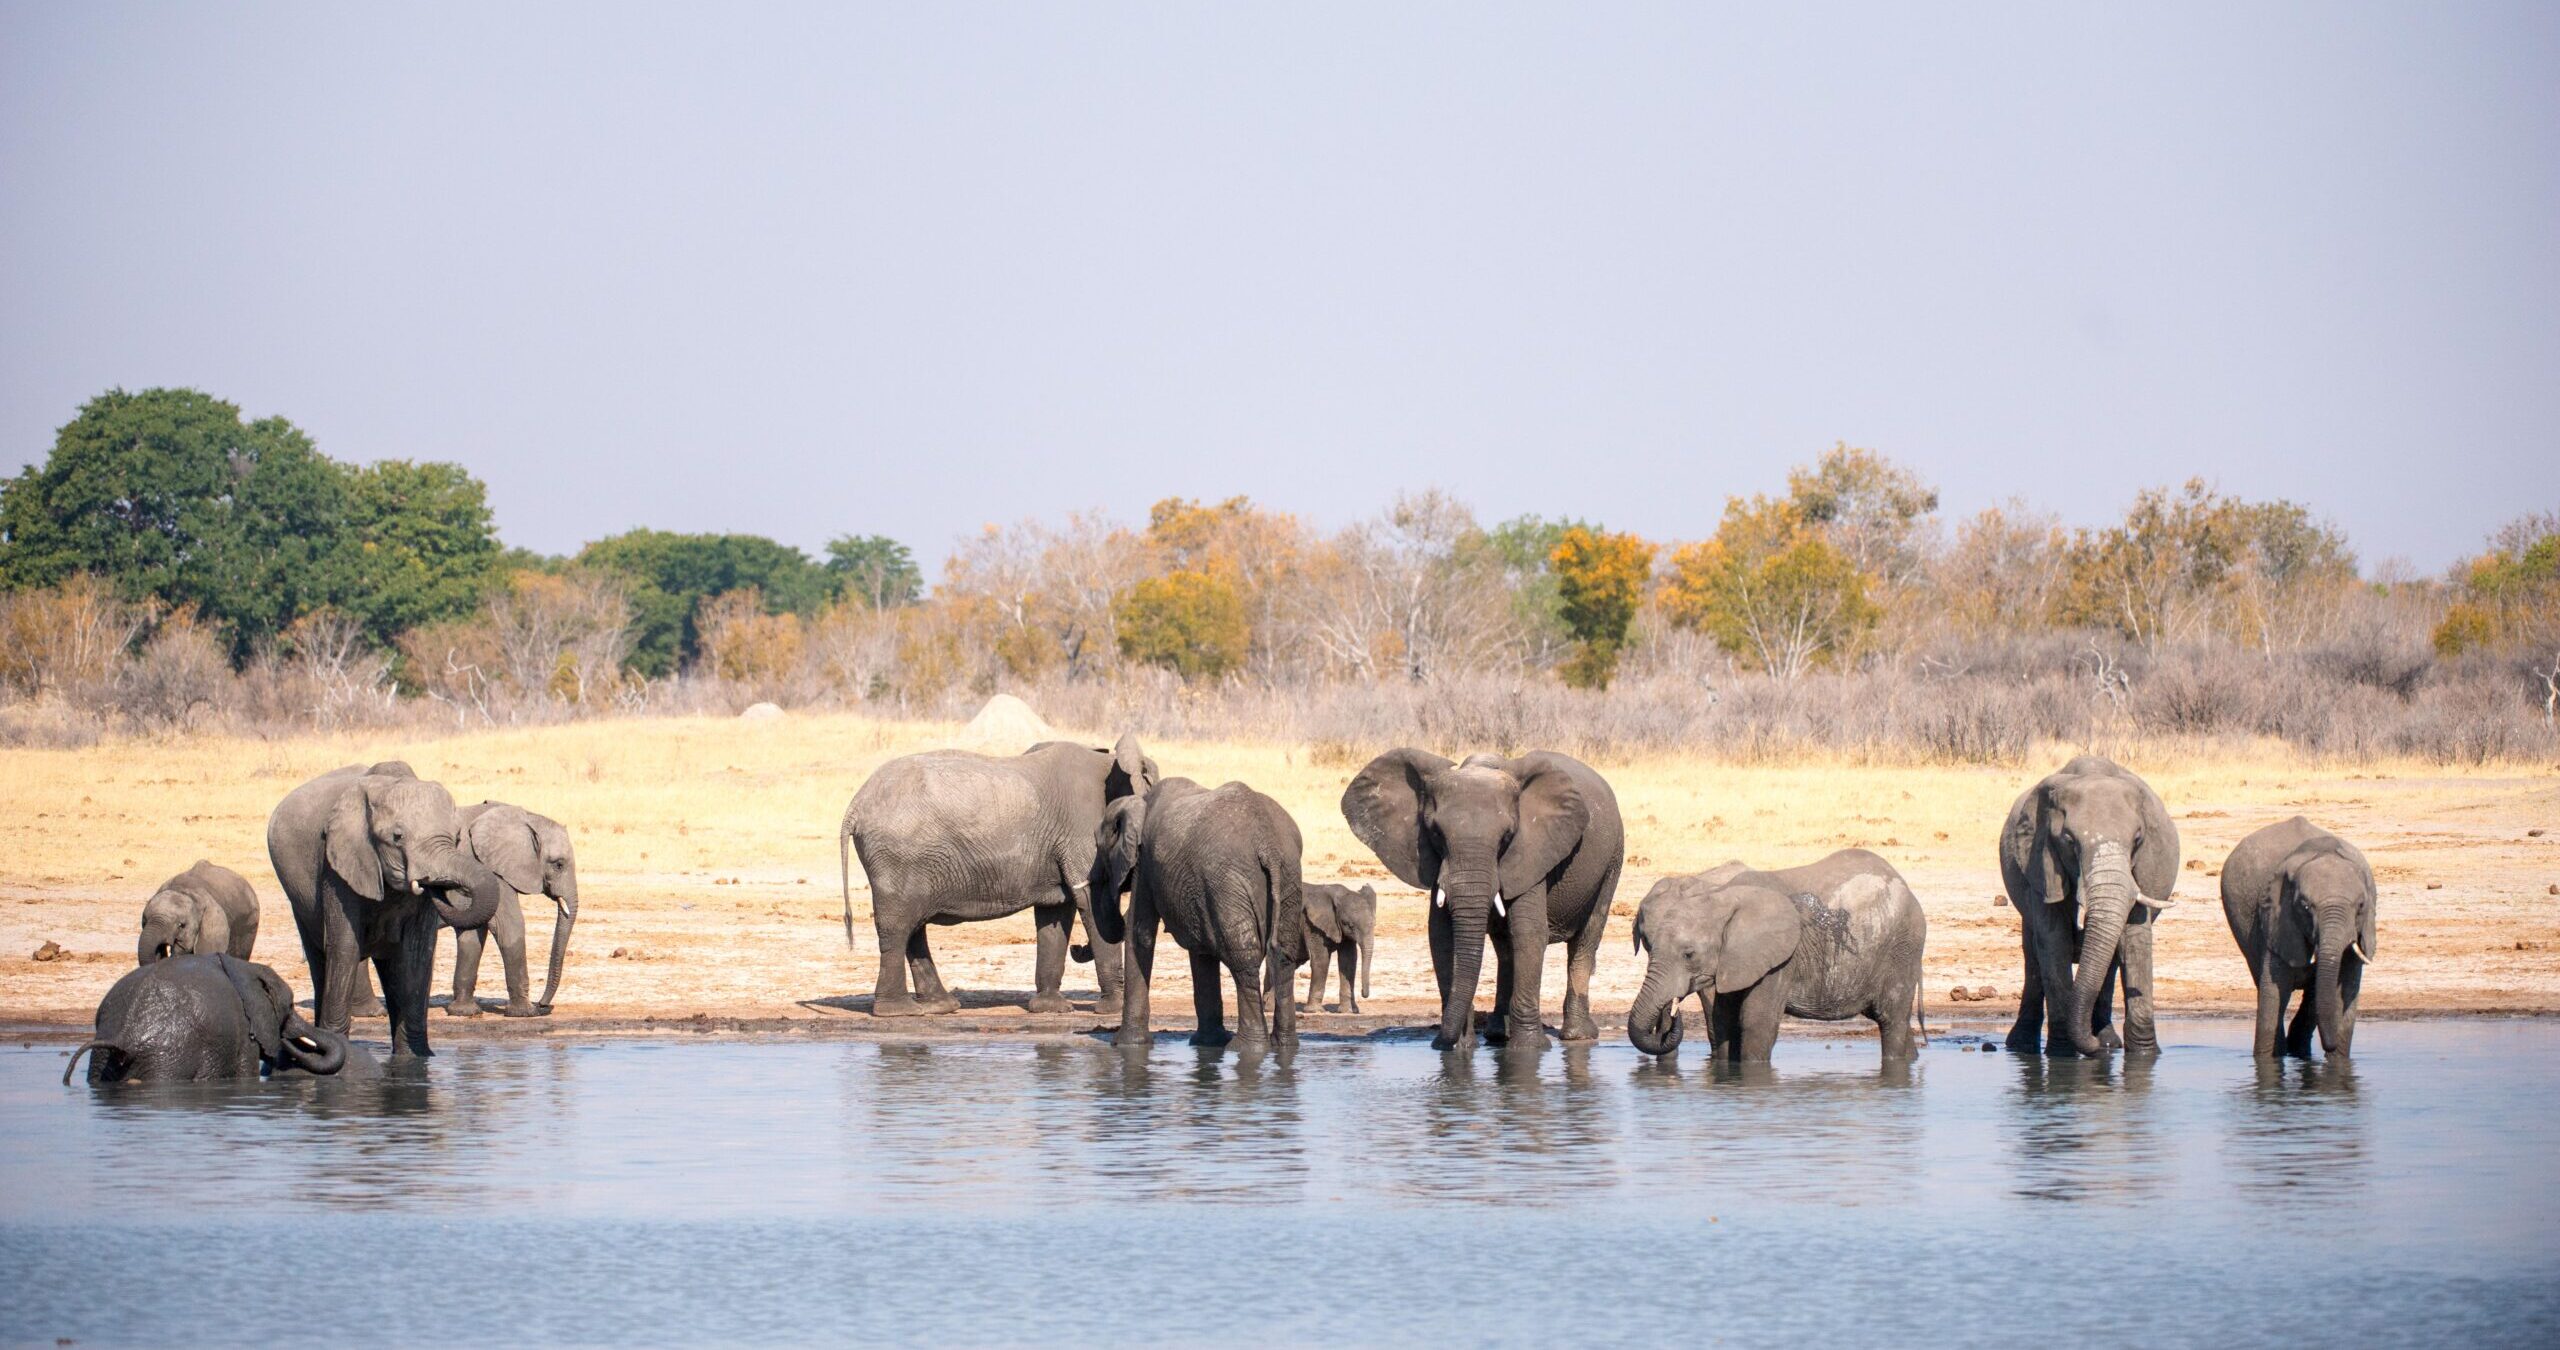 Elephants in Africa Face Grave Extinction Threat, New Expert